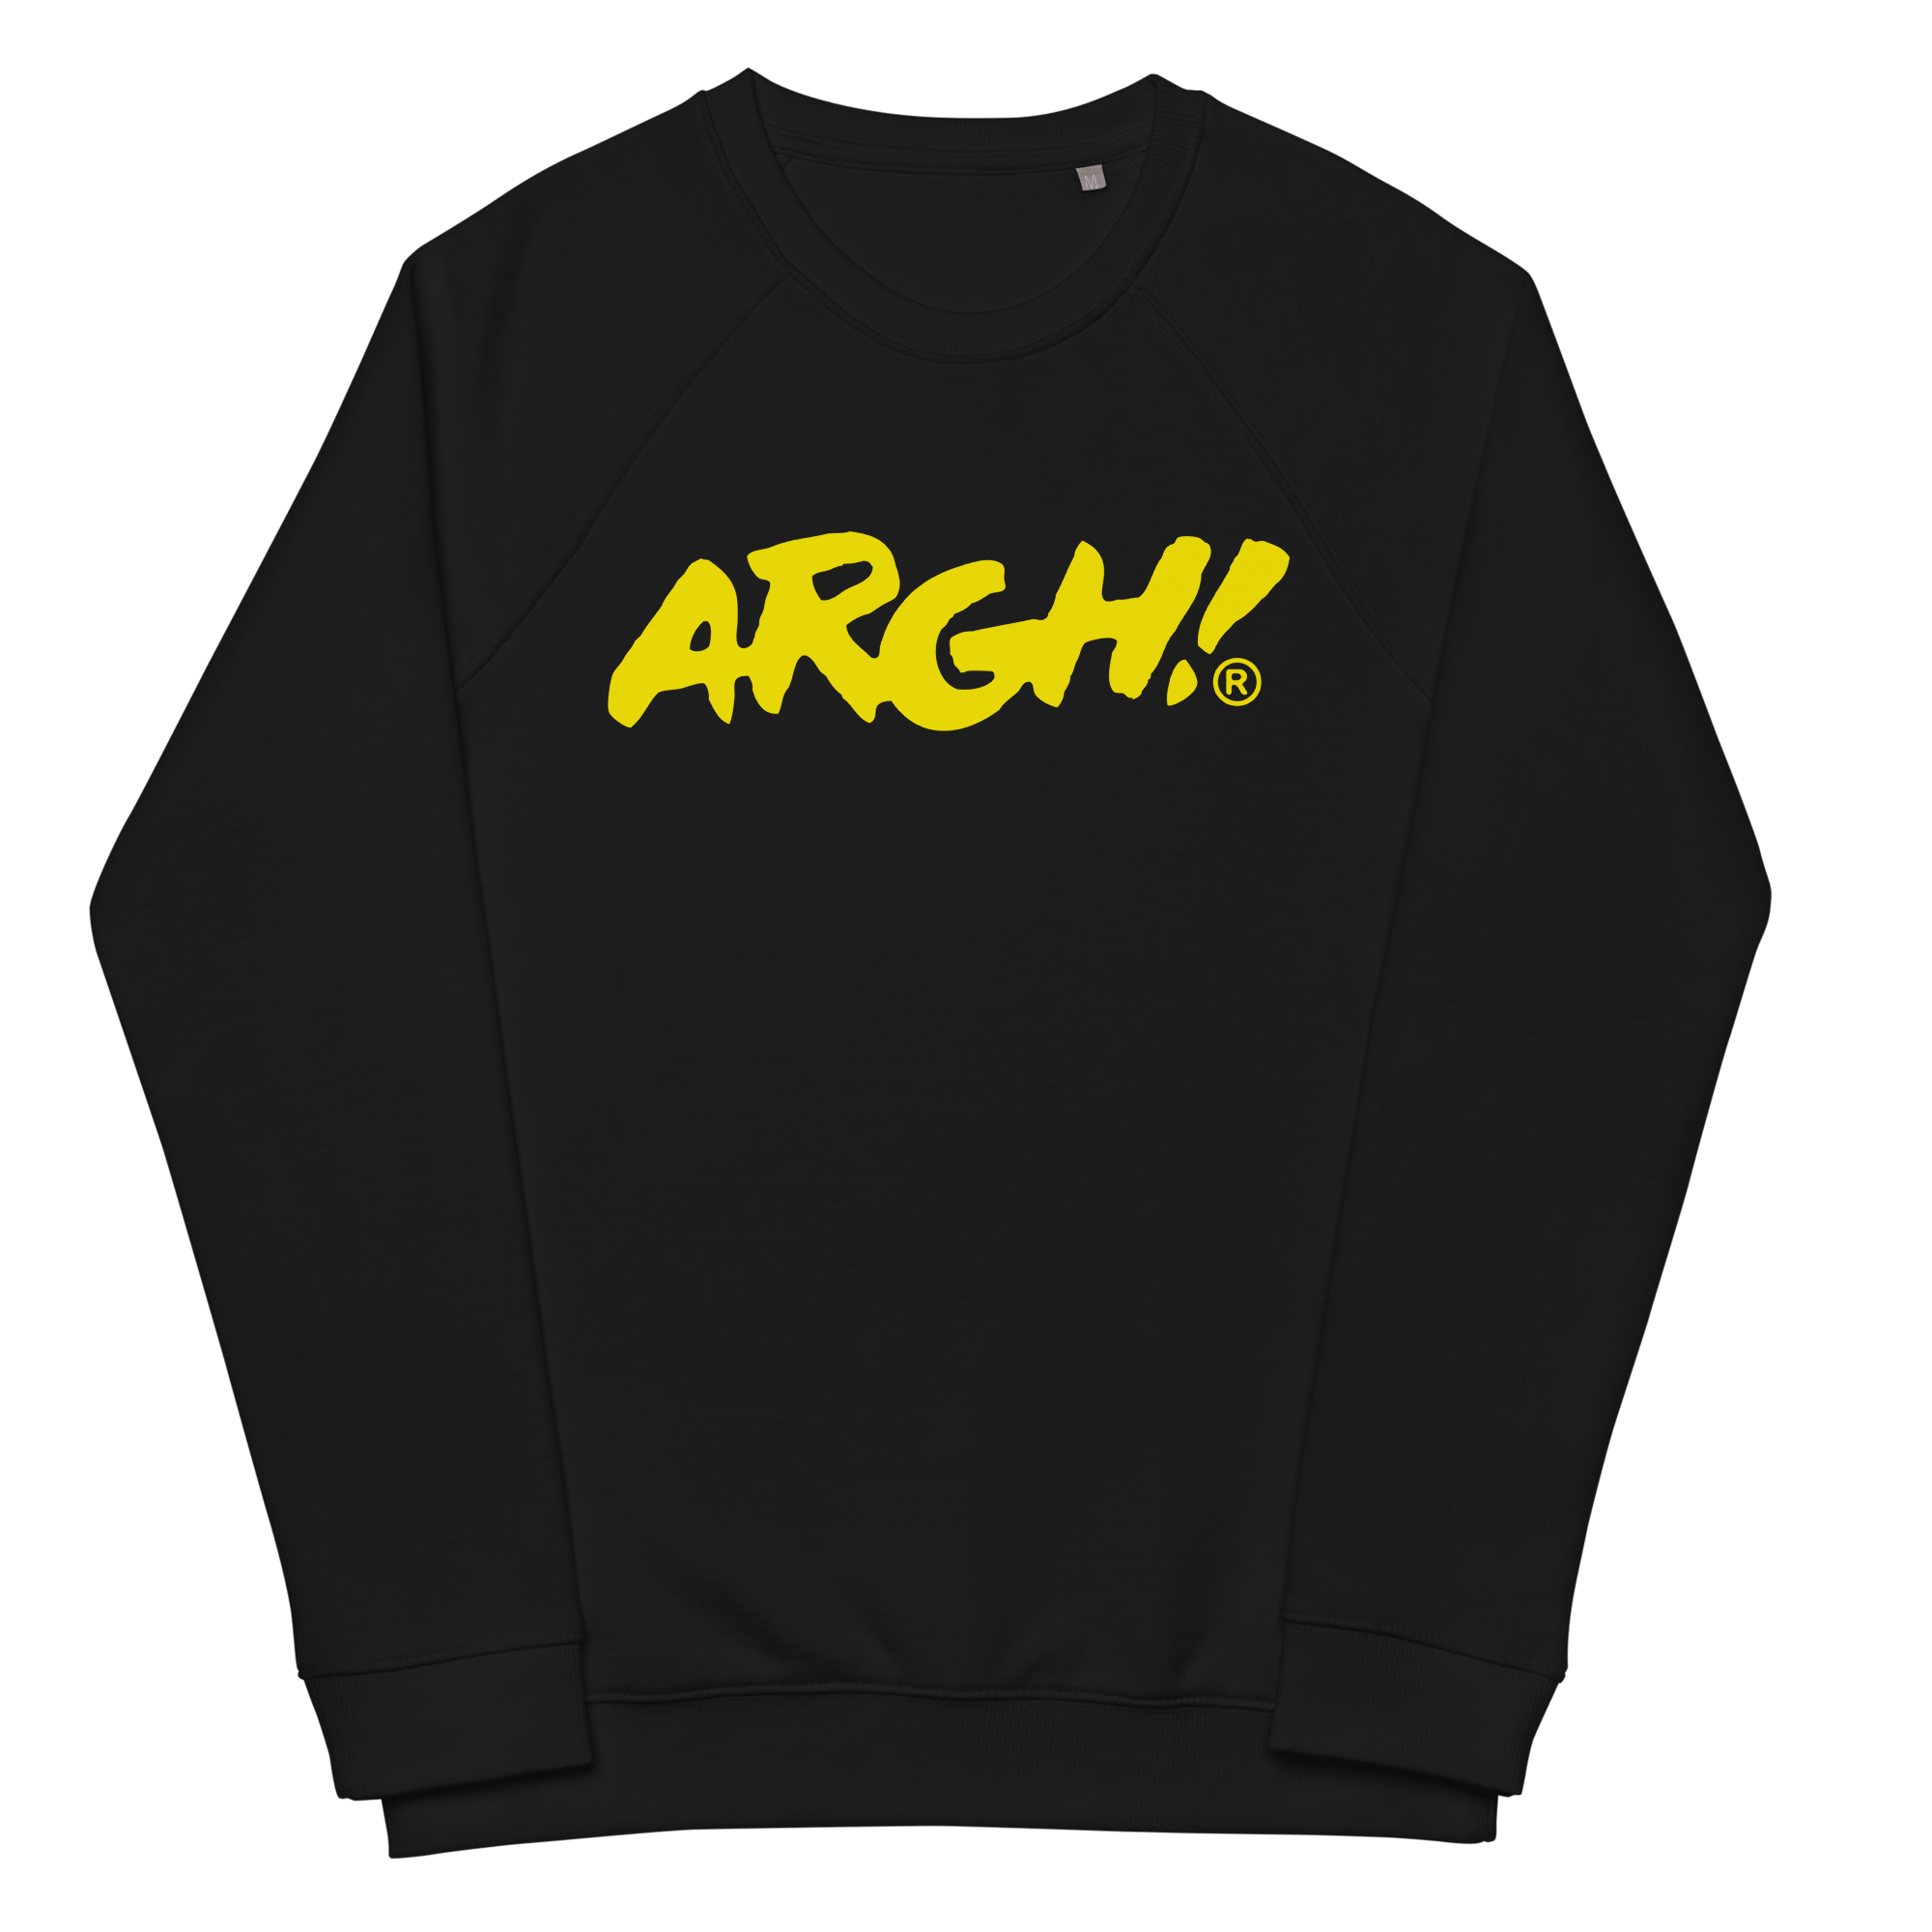 ARGH! Raglan SweatshirtARGH! Raglan Sweatshirt. feel comfy and look stylish at the same time. Mark both tasks as done with the unisex organic raglan sweatshirt. Its brushed fleece lining will make you feel like you’re being hugged by a cloud of softness .